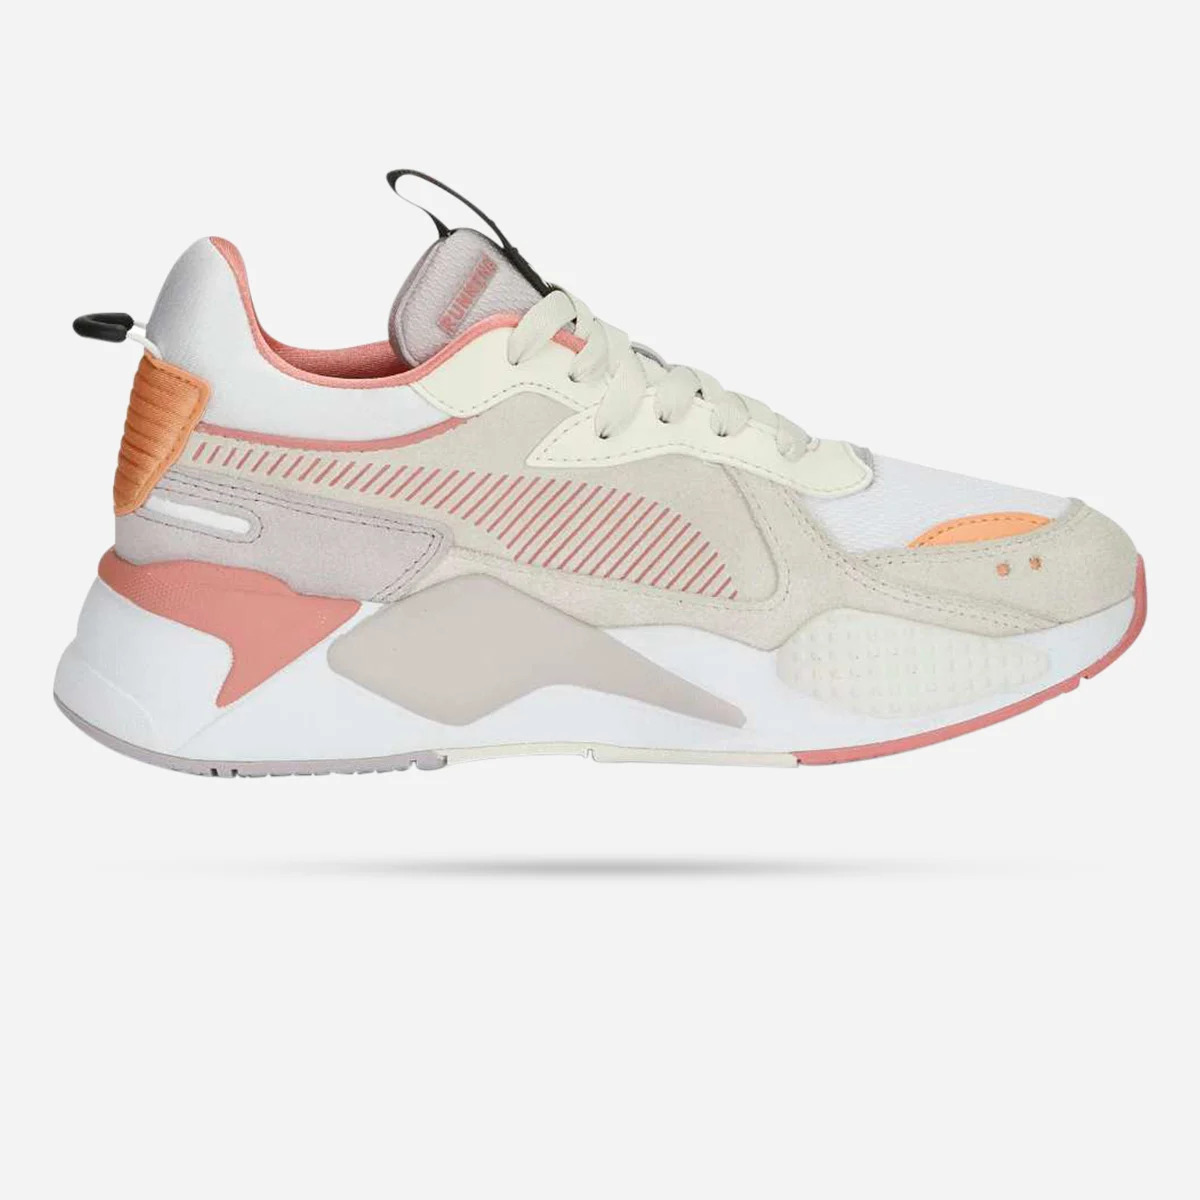 Puma RS-X Reinvention White/Pink dames sneakers